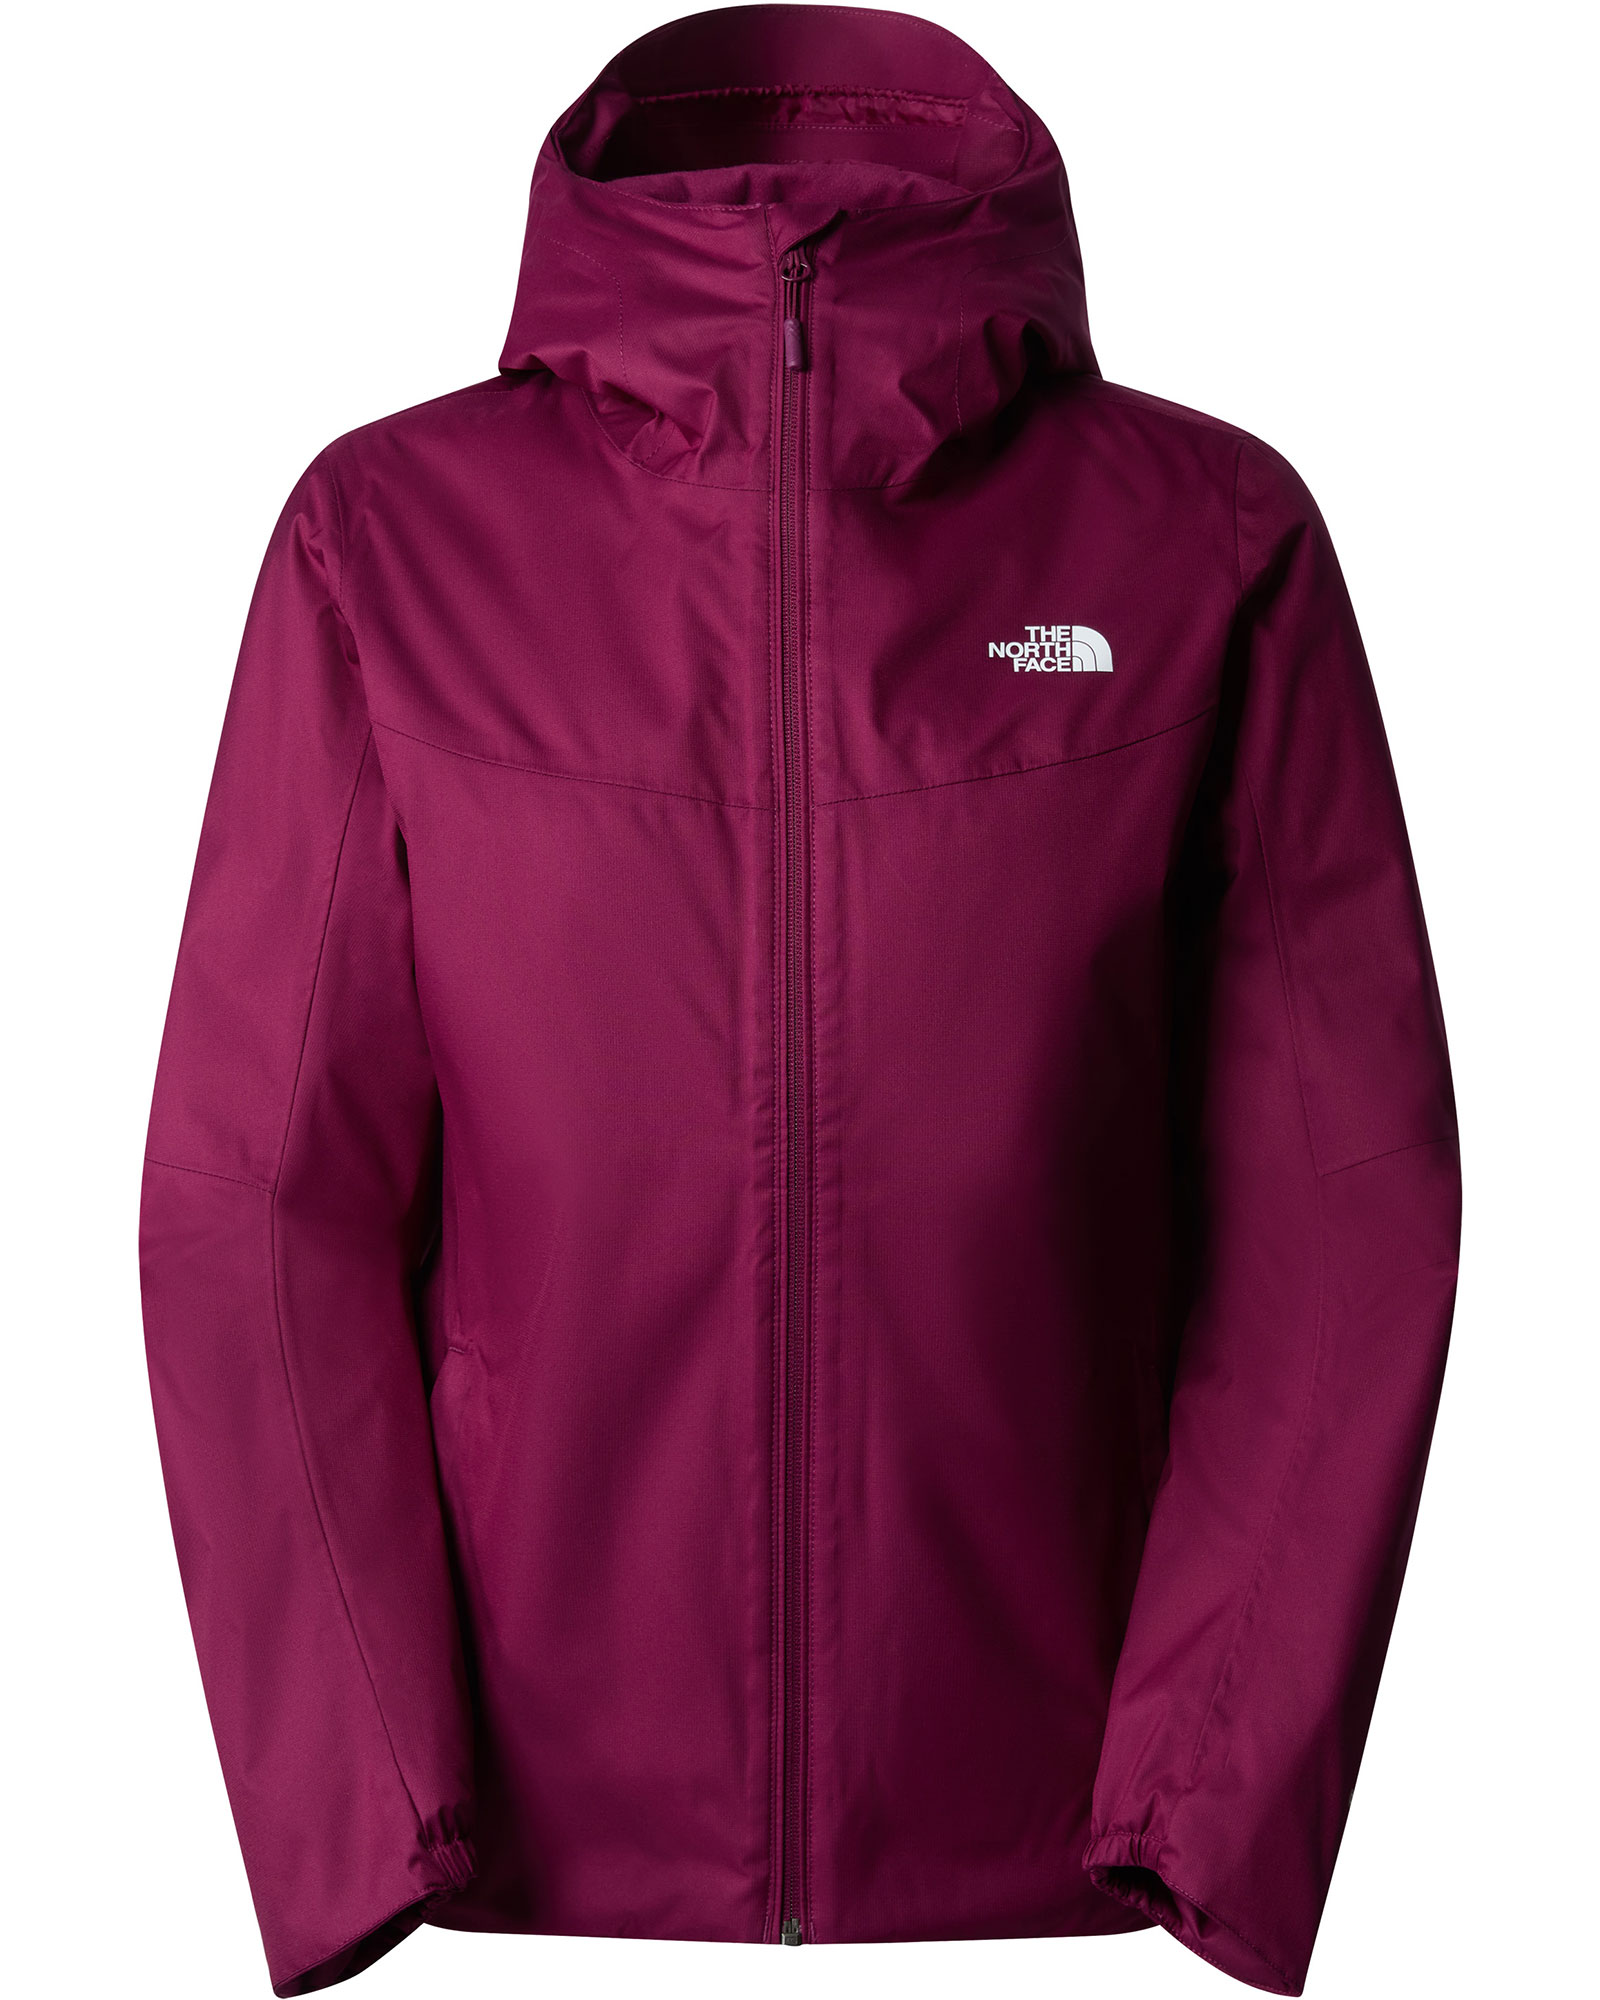 The North Face Quest DryVent Women’s Insulated Jacket - Boysenberry XL